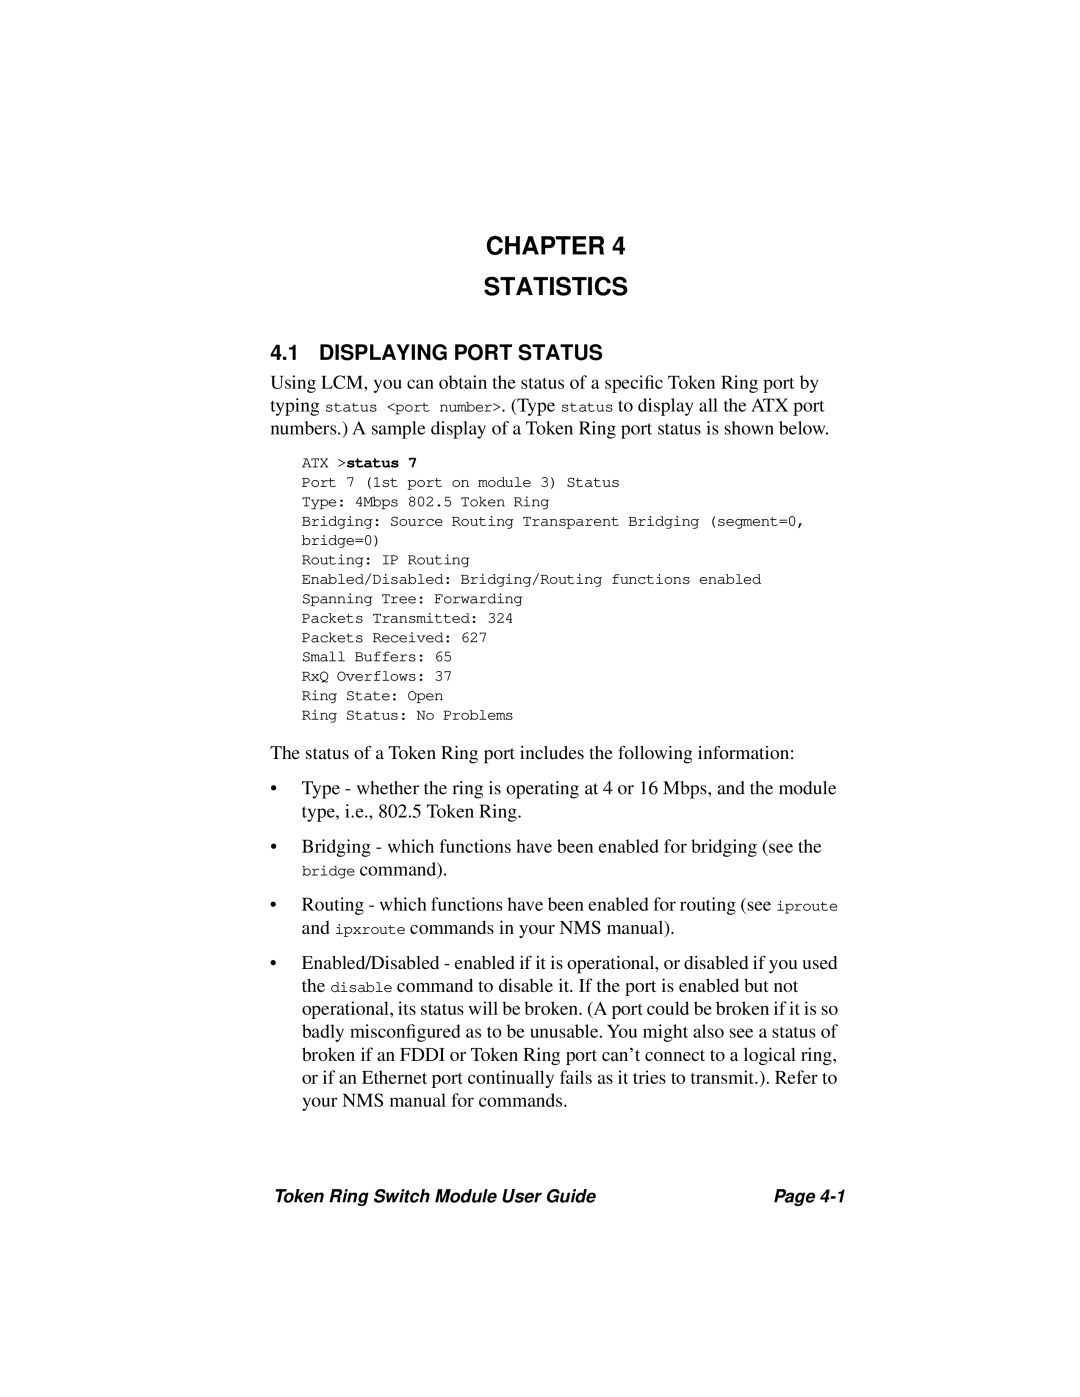 Cabletron Systems 3T02-04 manual Chapter Statistics, Displaying Port Status 